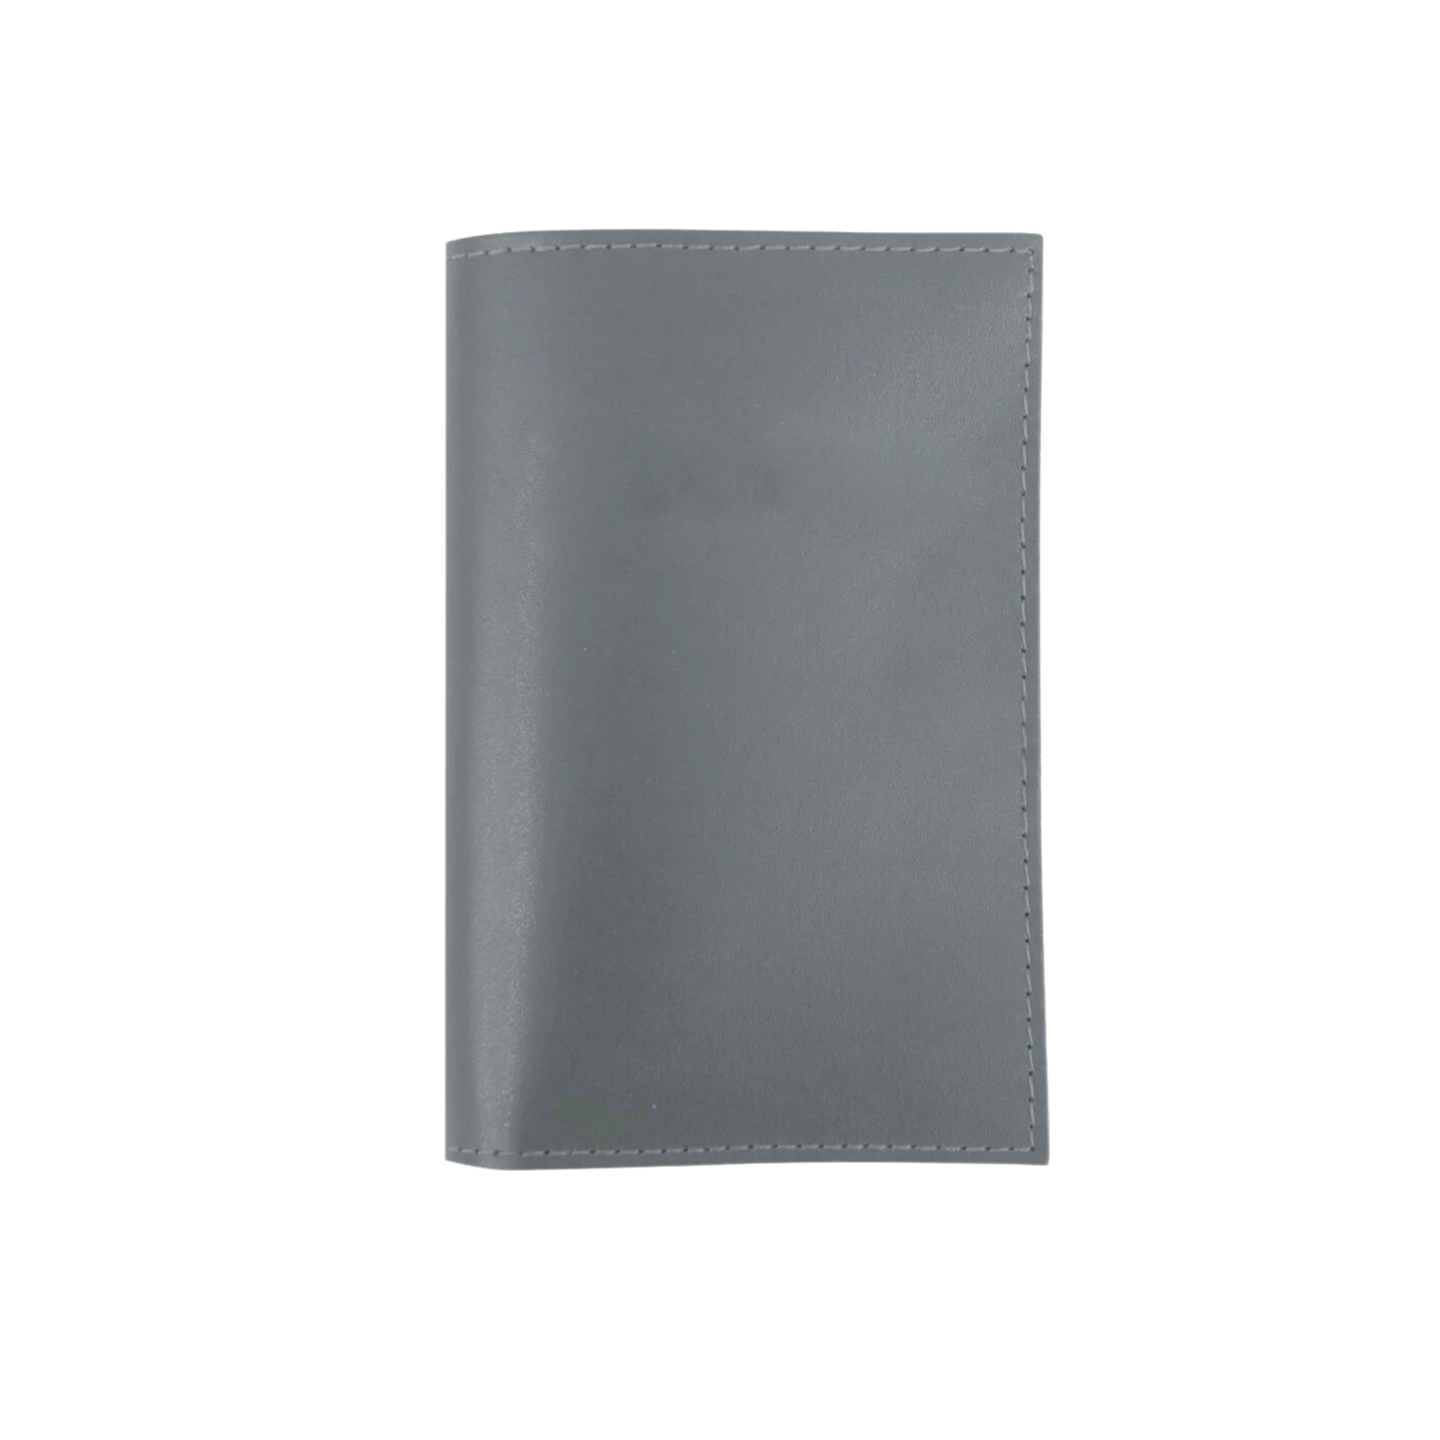 Passport Cover - Steel Leather Front Angle in Color 'Steel Leather'  Edit alt text